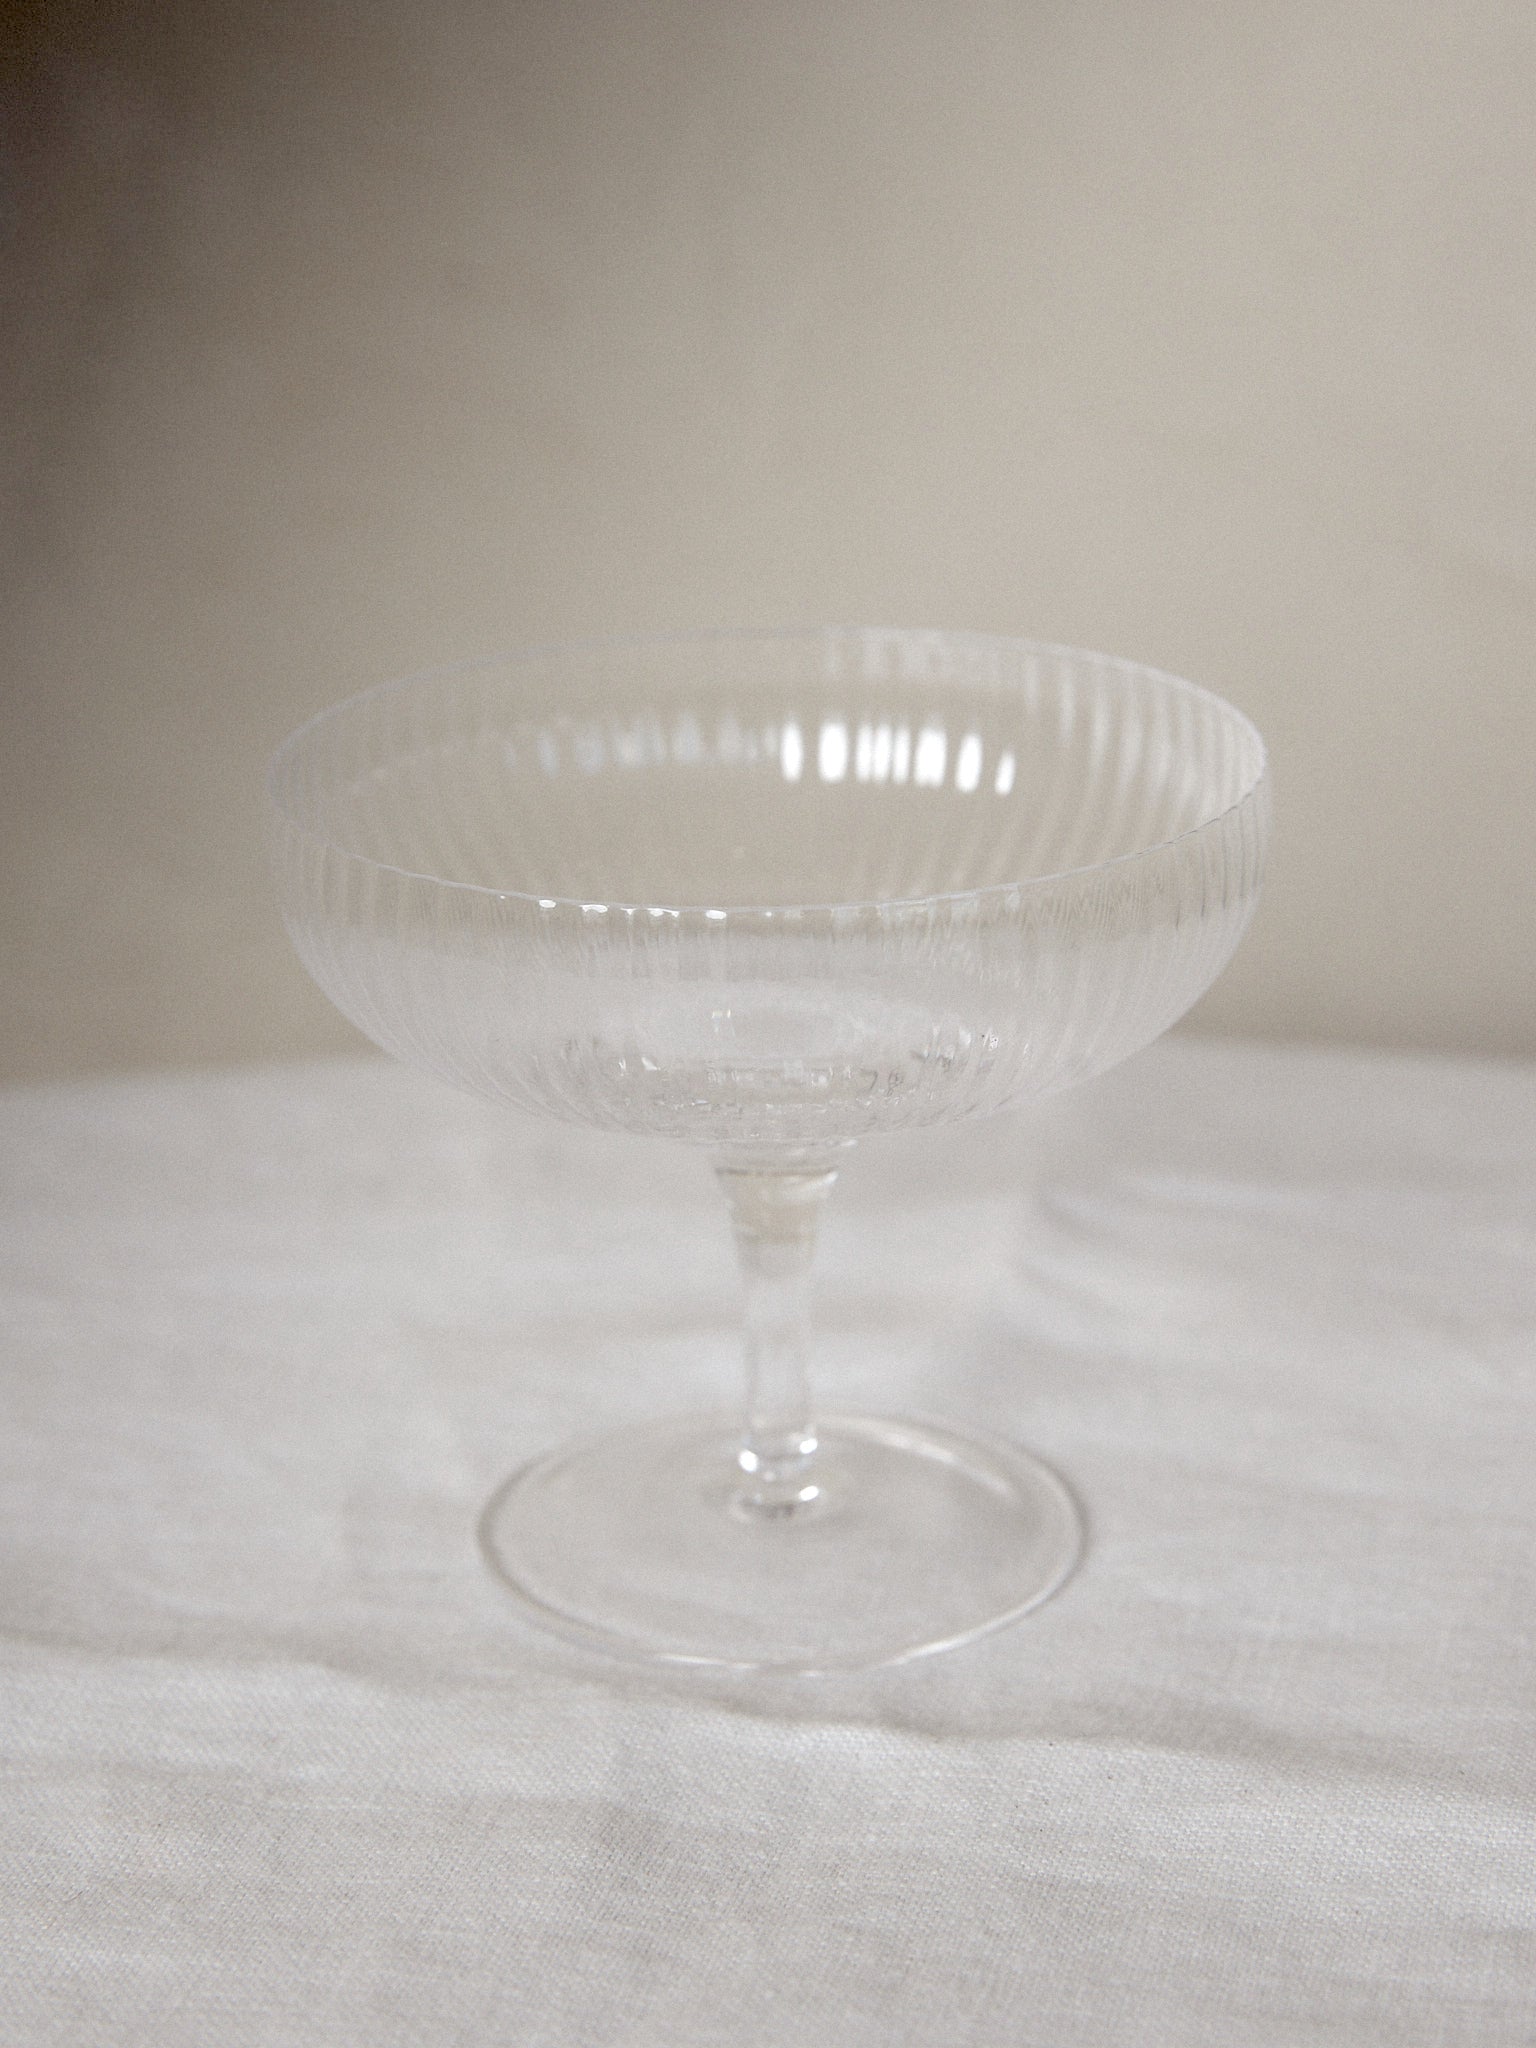 Champagne Coupe Set/4. Unique find. Special edition set of ribbed champagne glasses designed by famed Michelin star chef and restauranteur, Sergio Herman, featuring delicate, tender folds fading to the edge of the glass. 